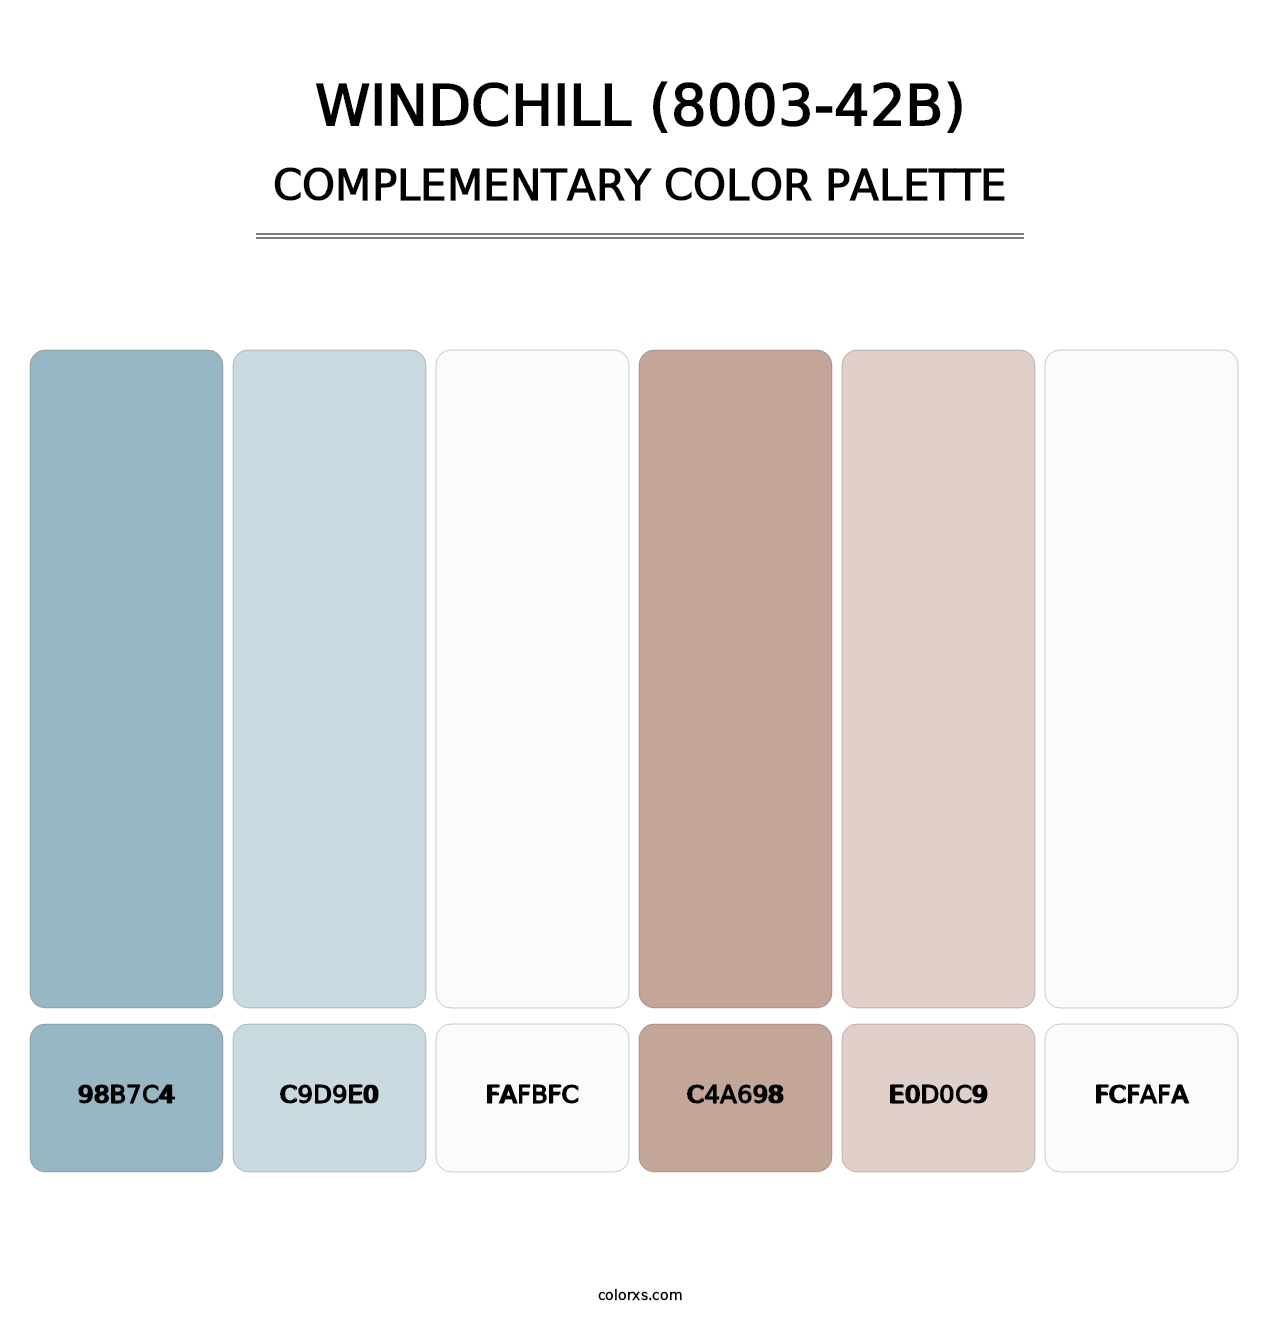 Windchill (8003-42B) - Complementary Color Palette